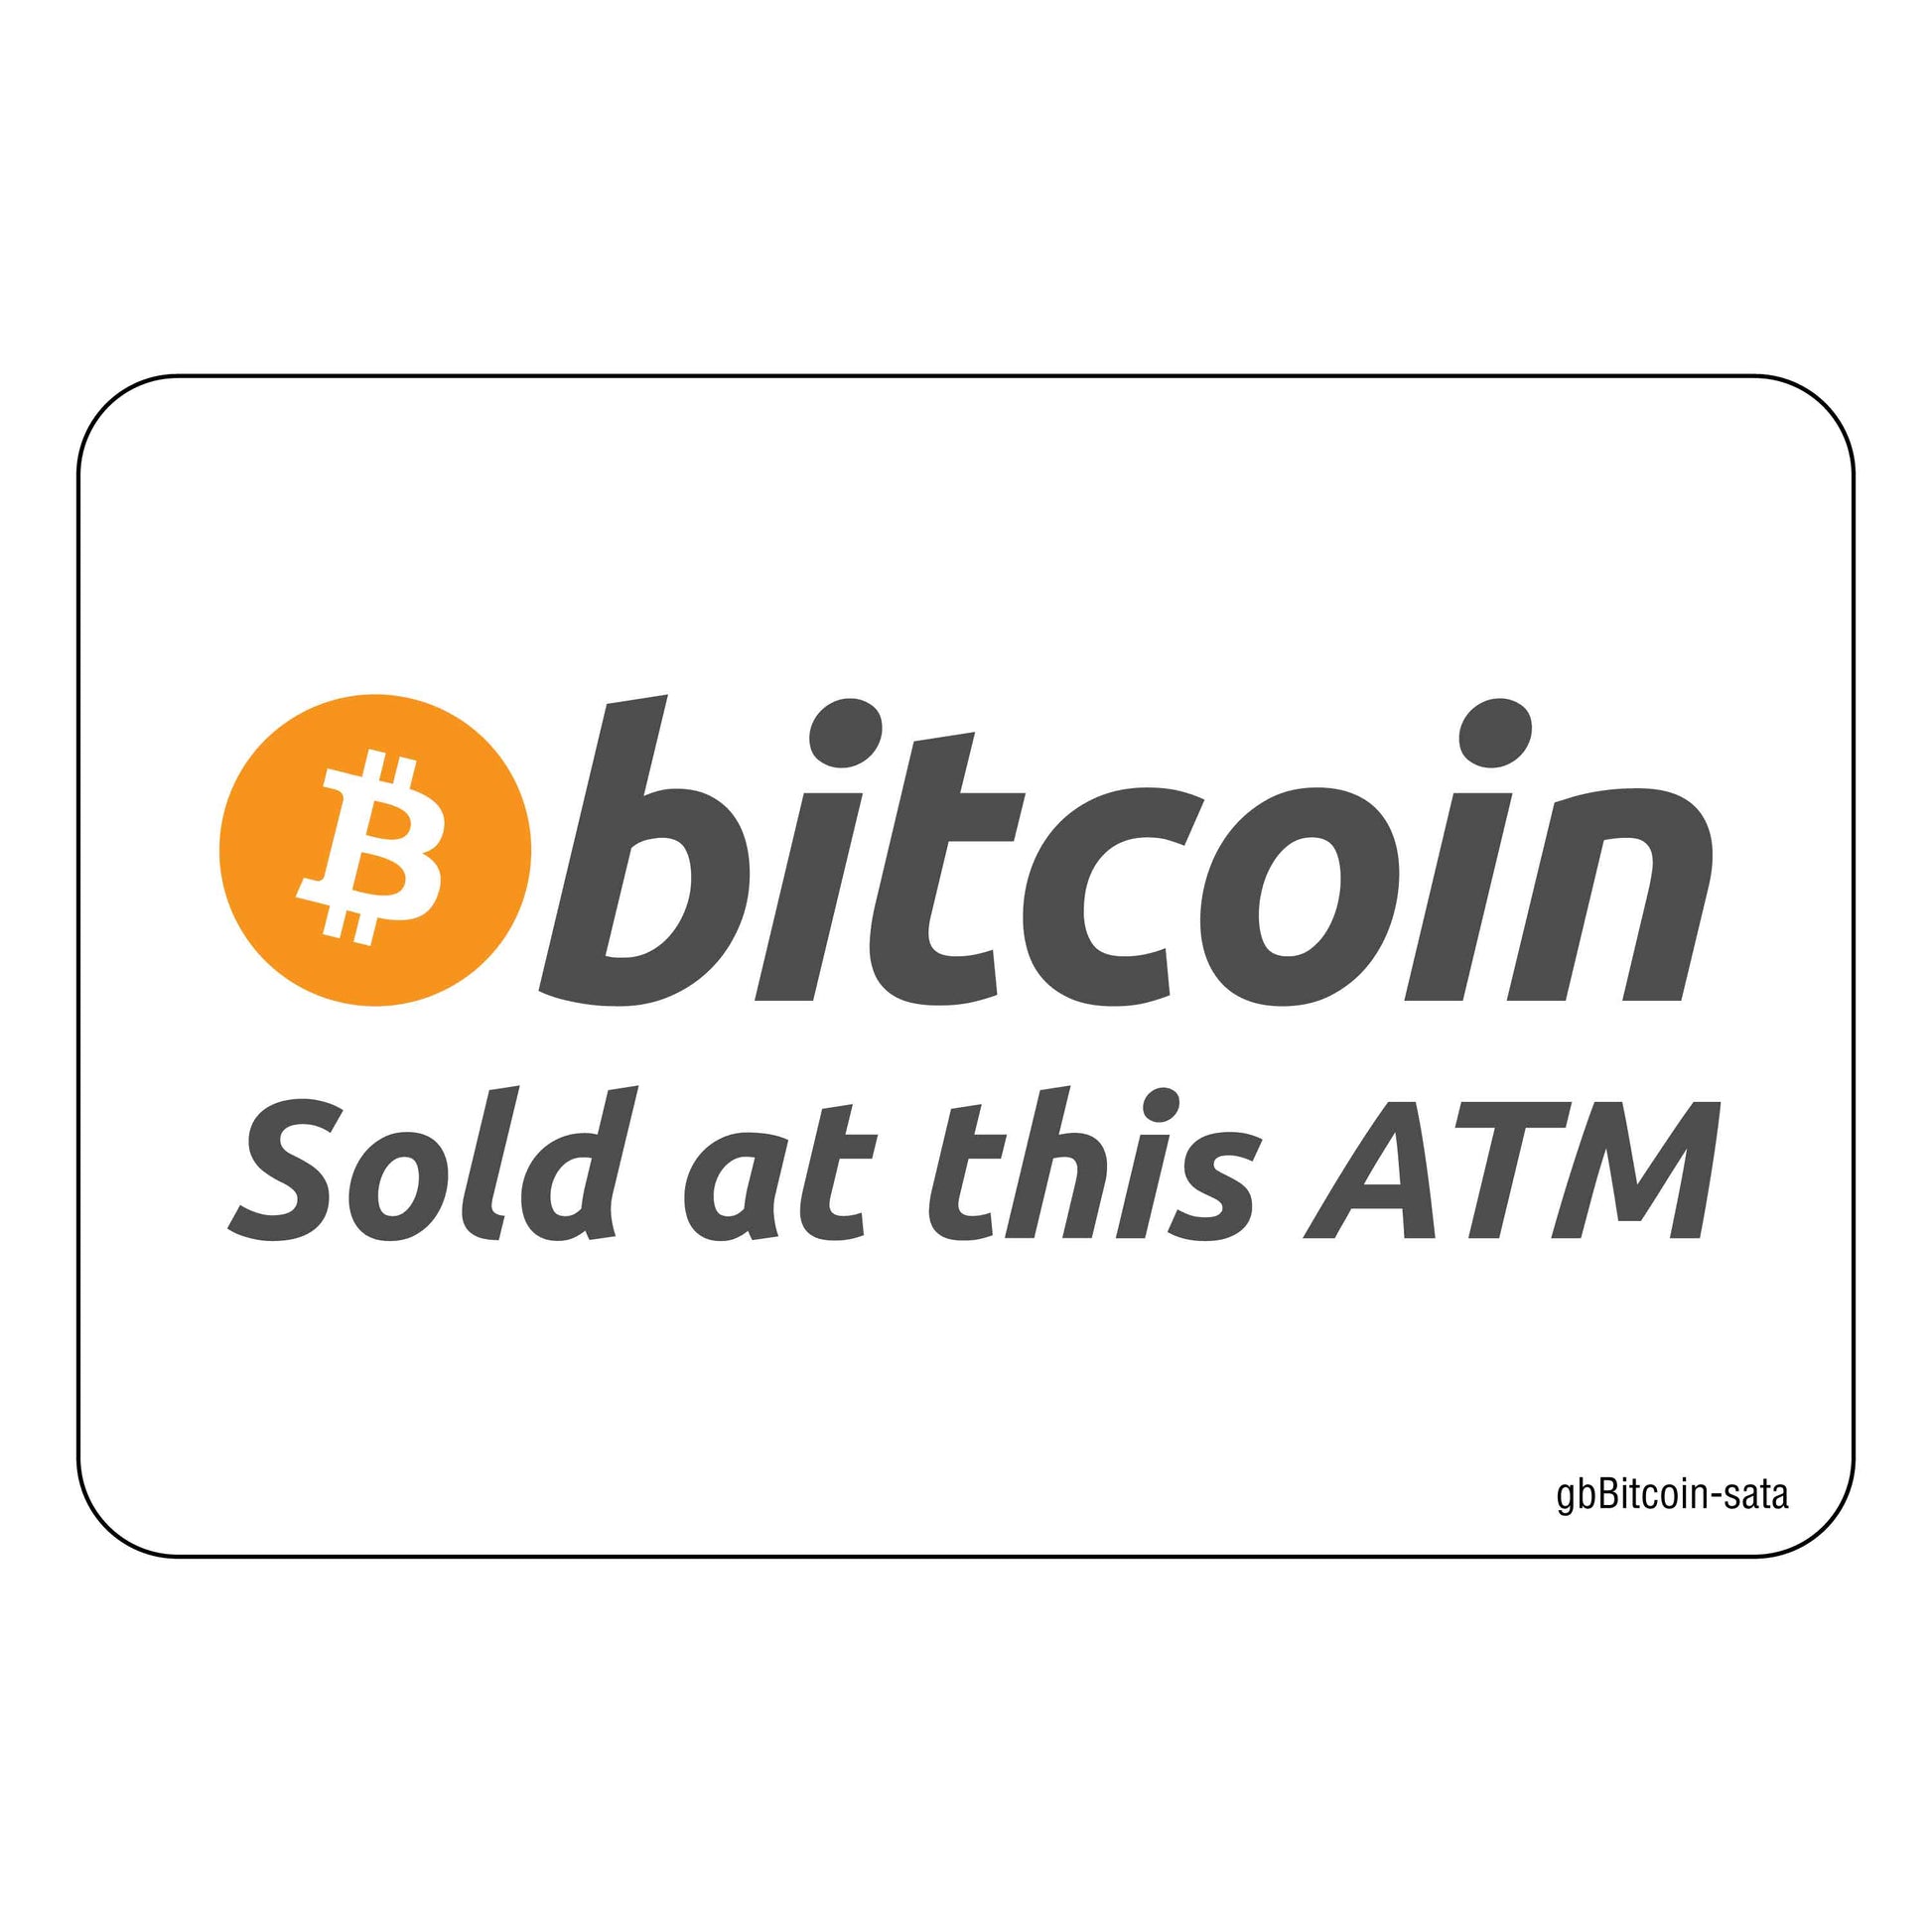 Bitcoin Sold at This ATM Decal. 3 inches by 2 inches in size. 